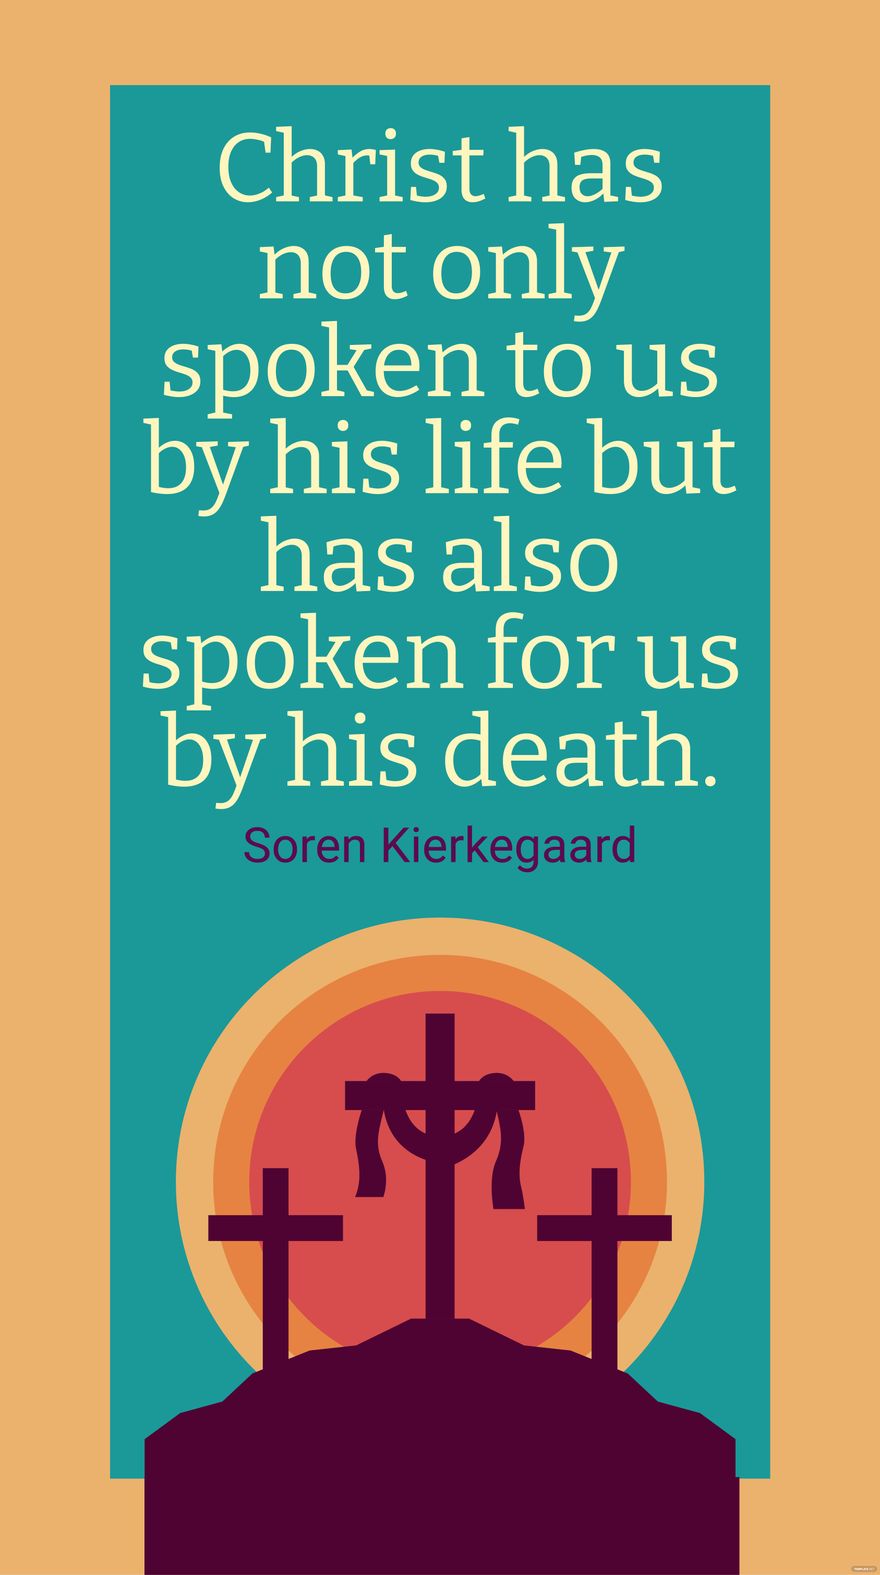 Free Soren Kierkegaard - Christ has not only spoken to us by his life but has also spoken for us by his death.